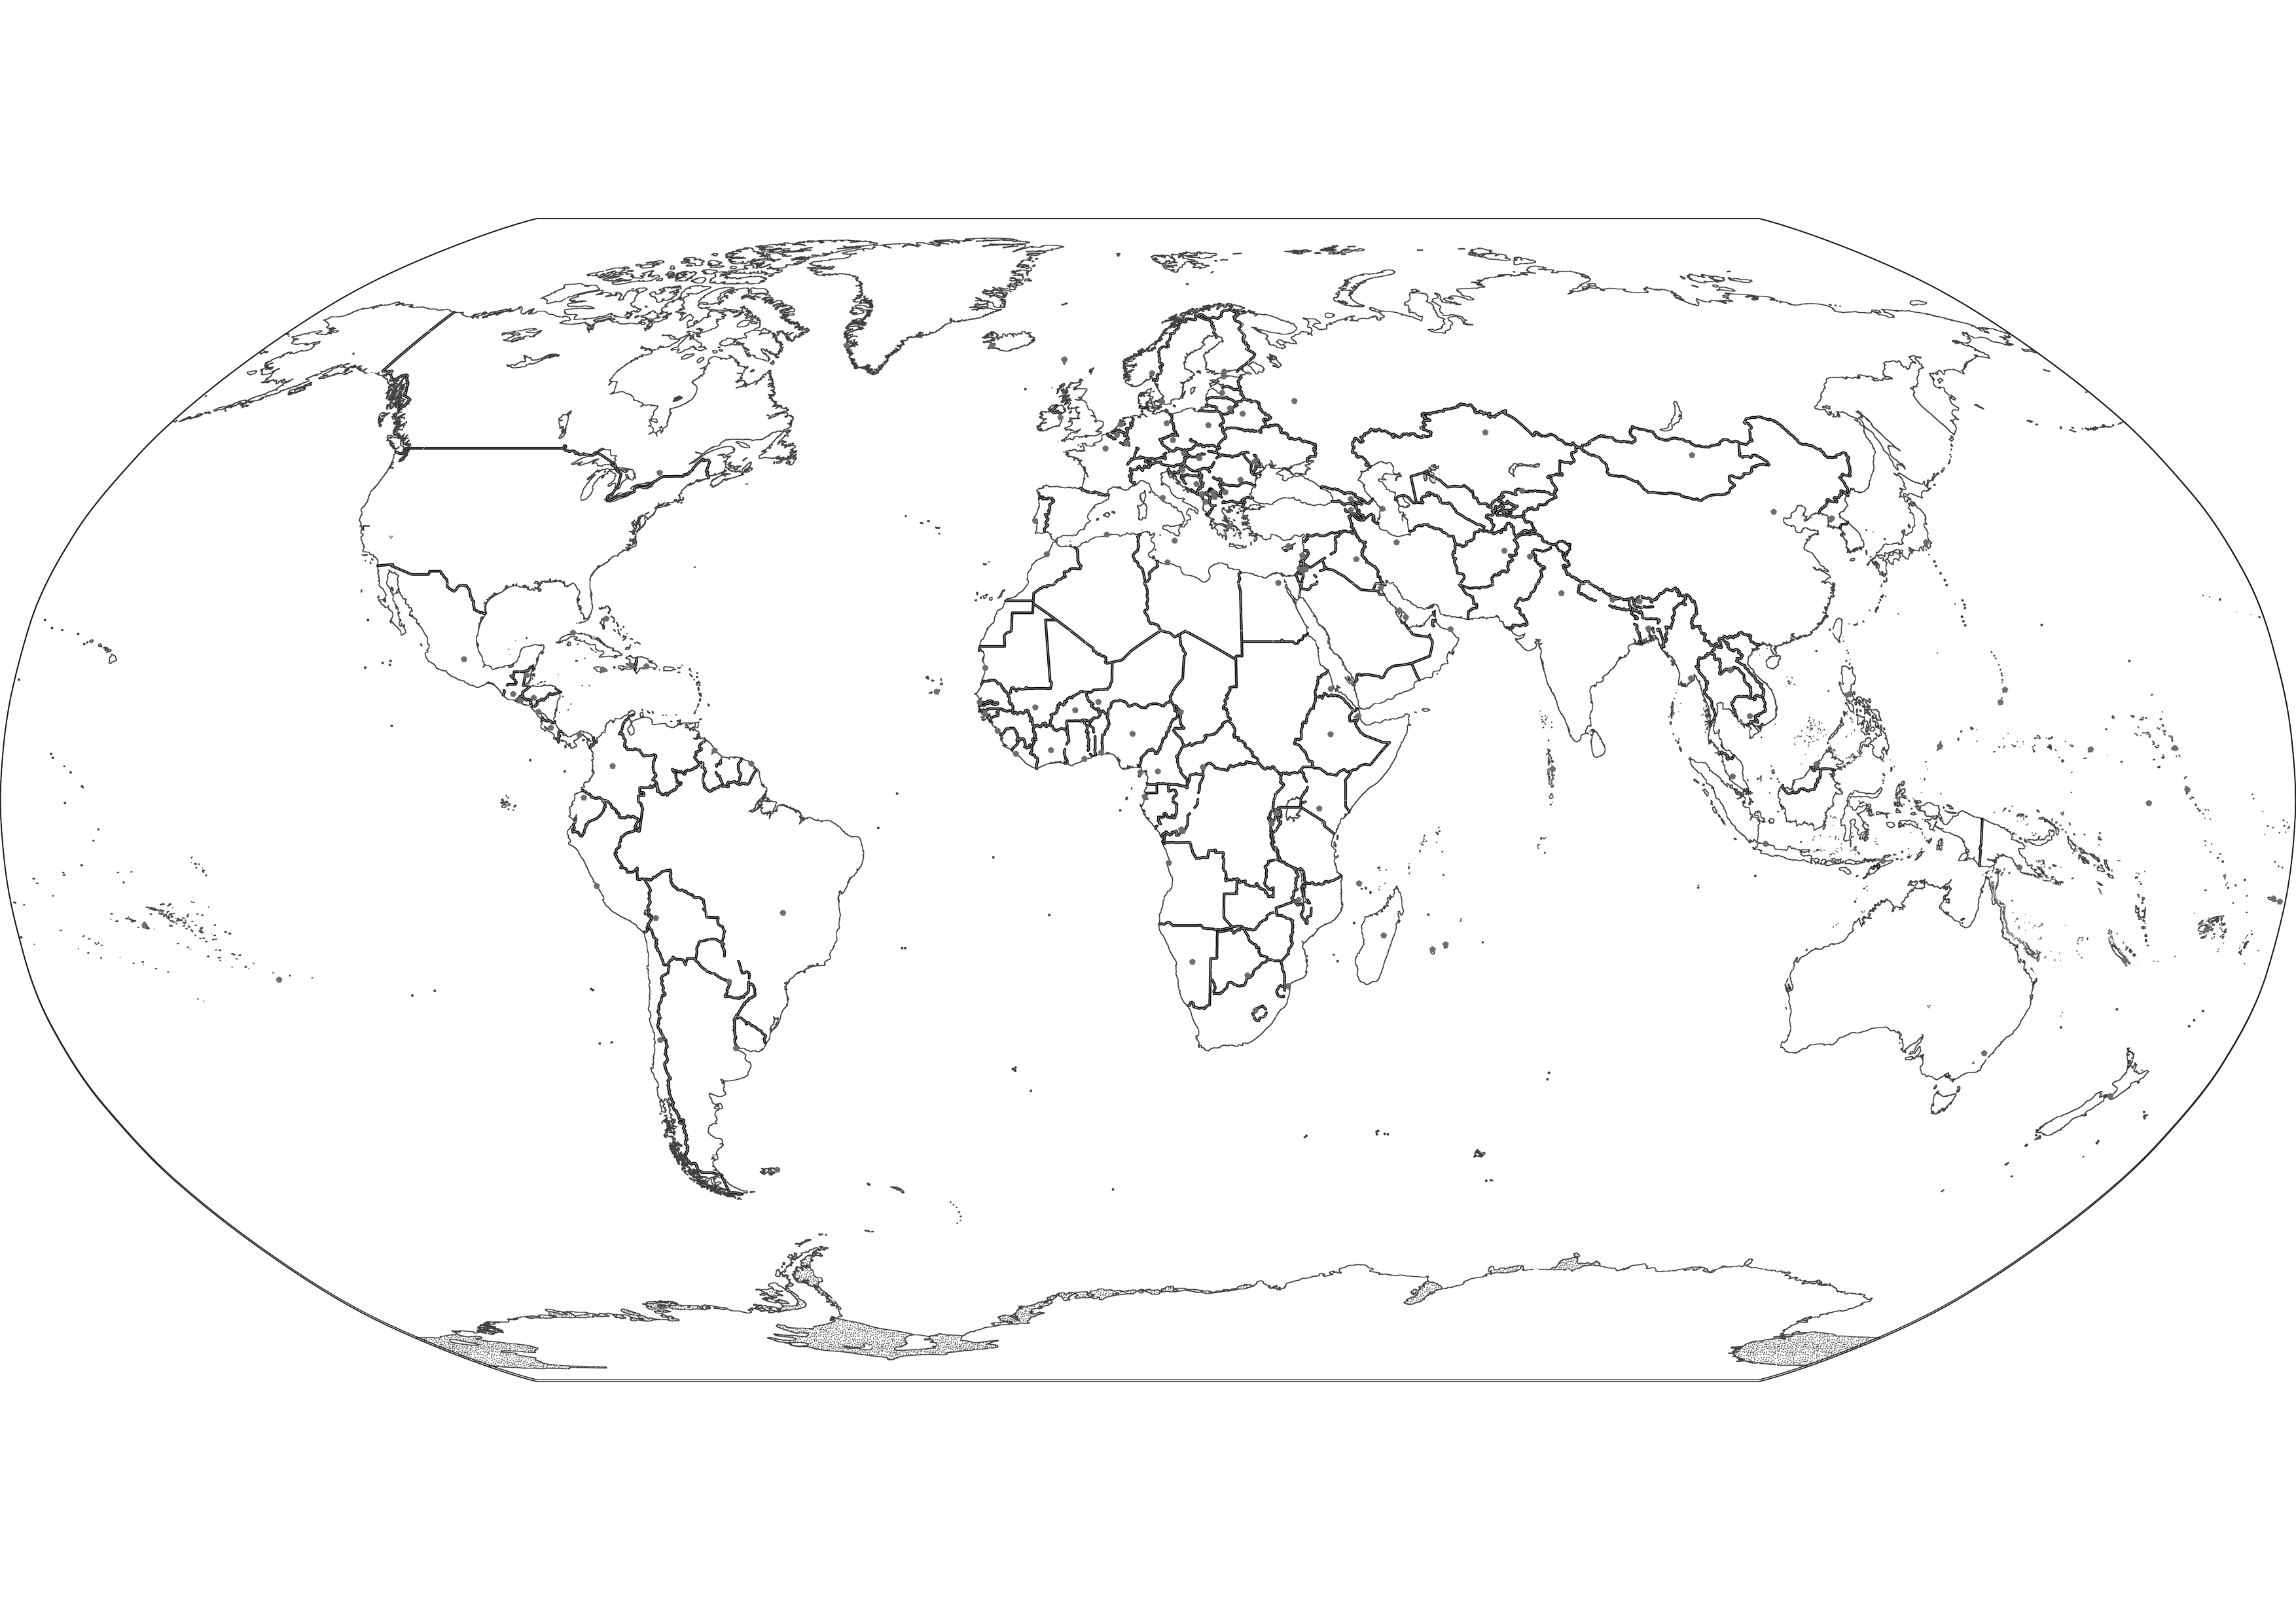 Disclosed world map.